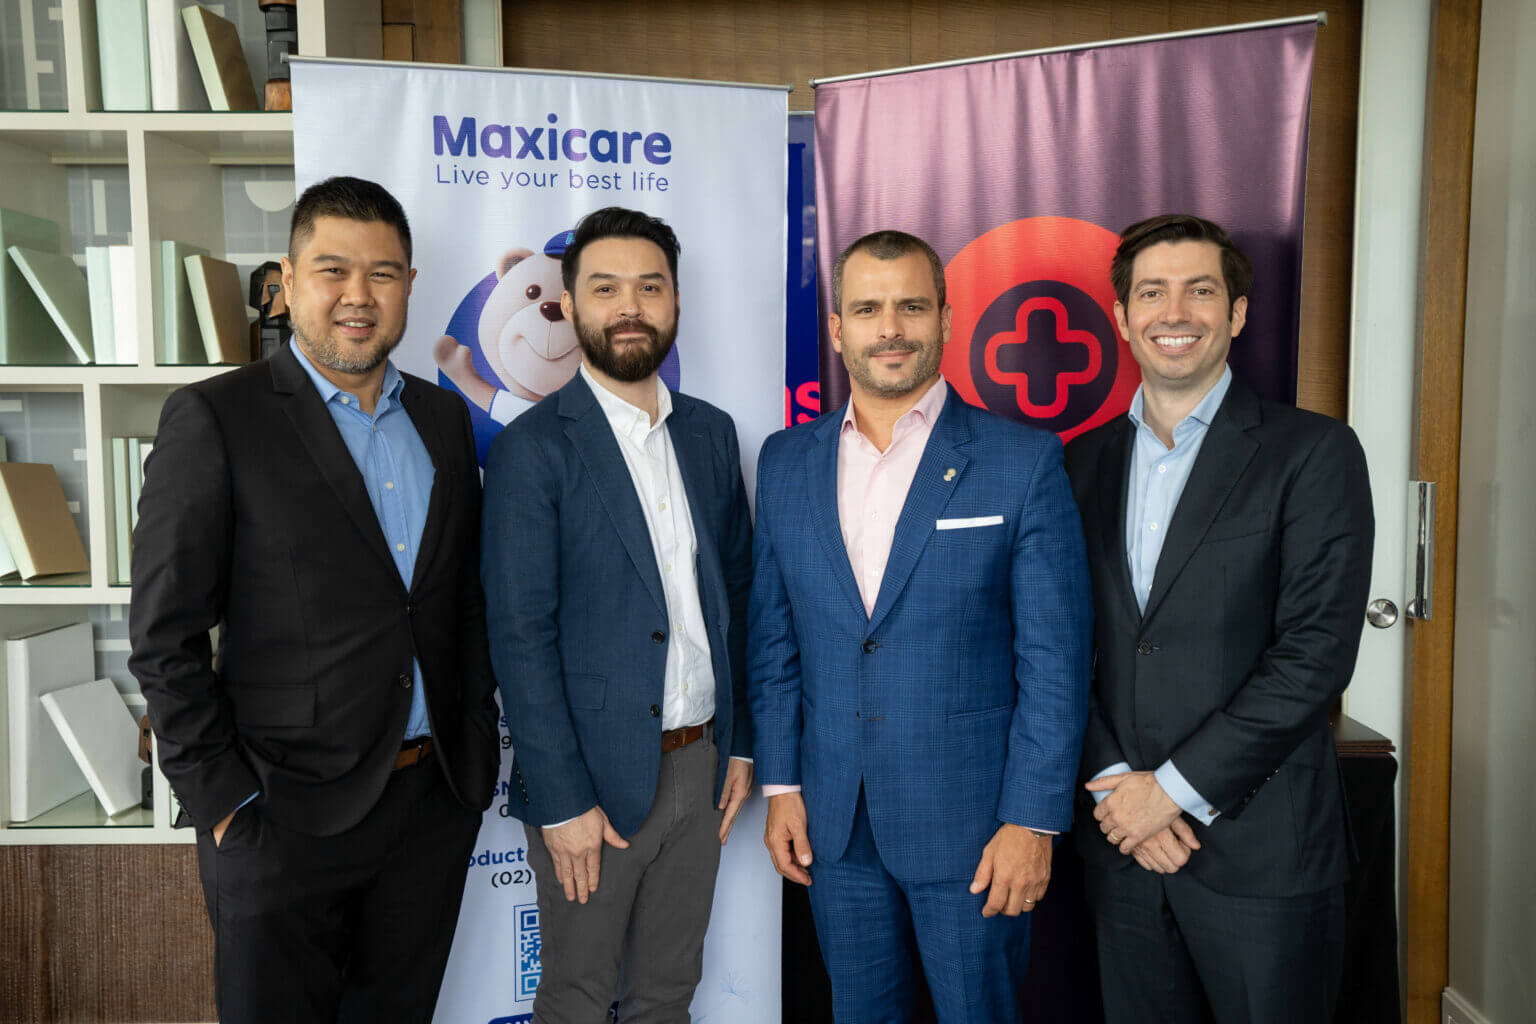 Partnership with Maxicare